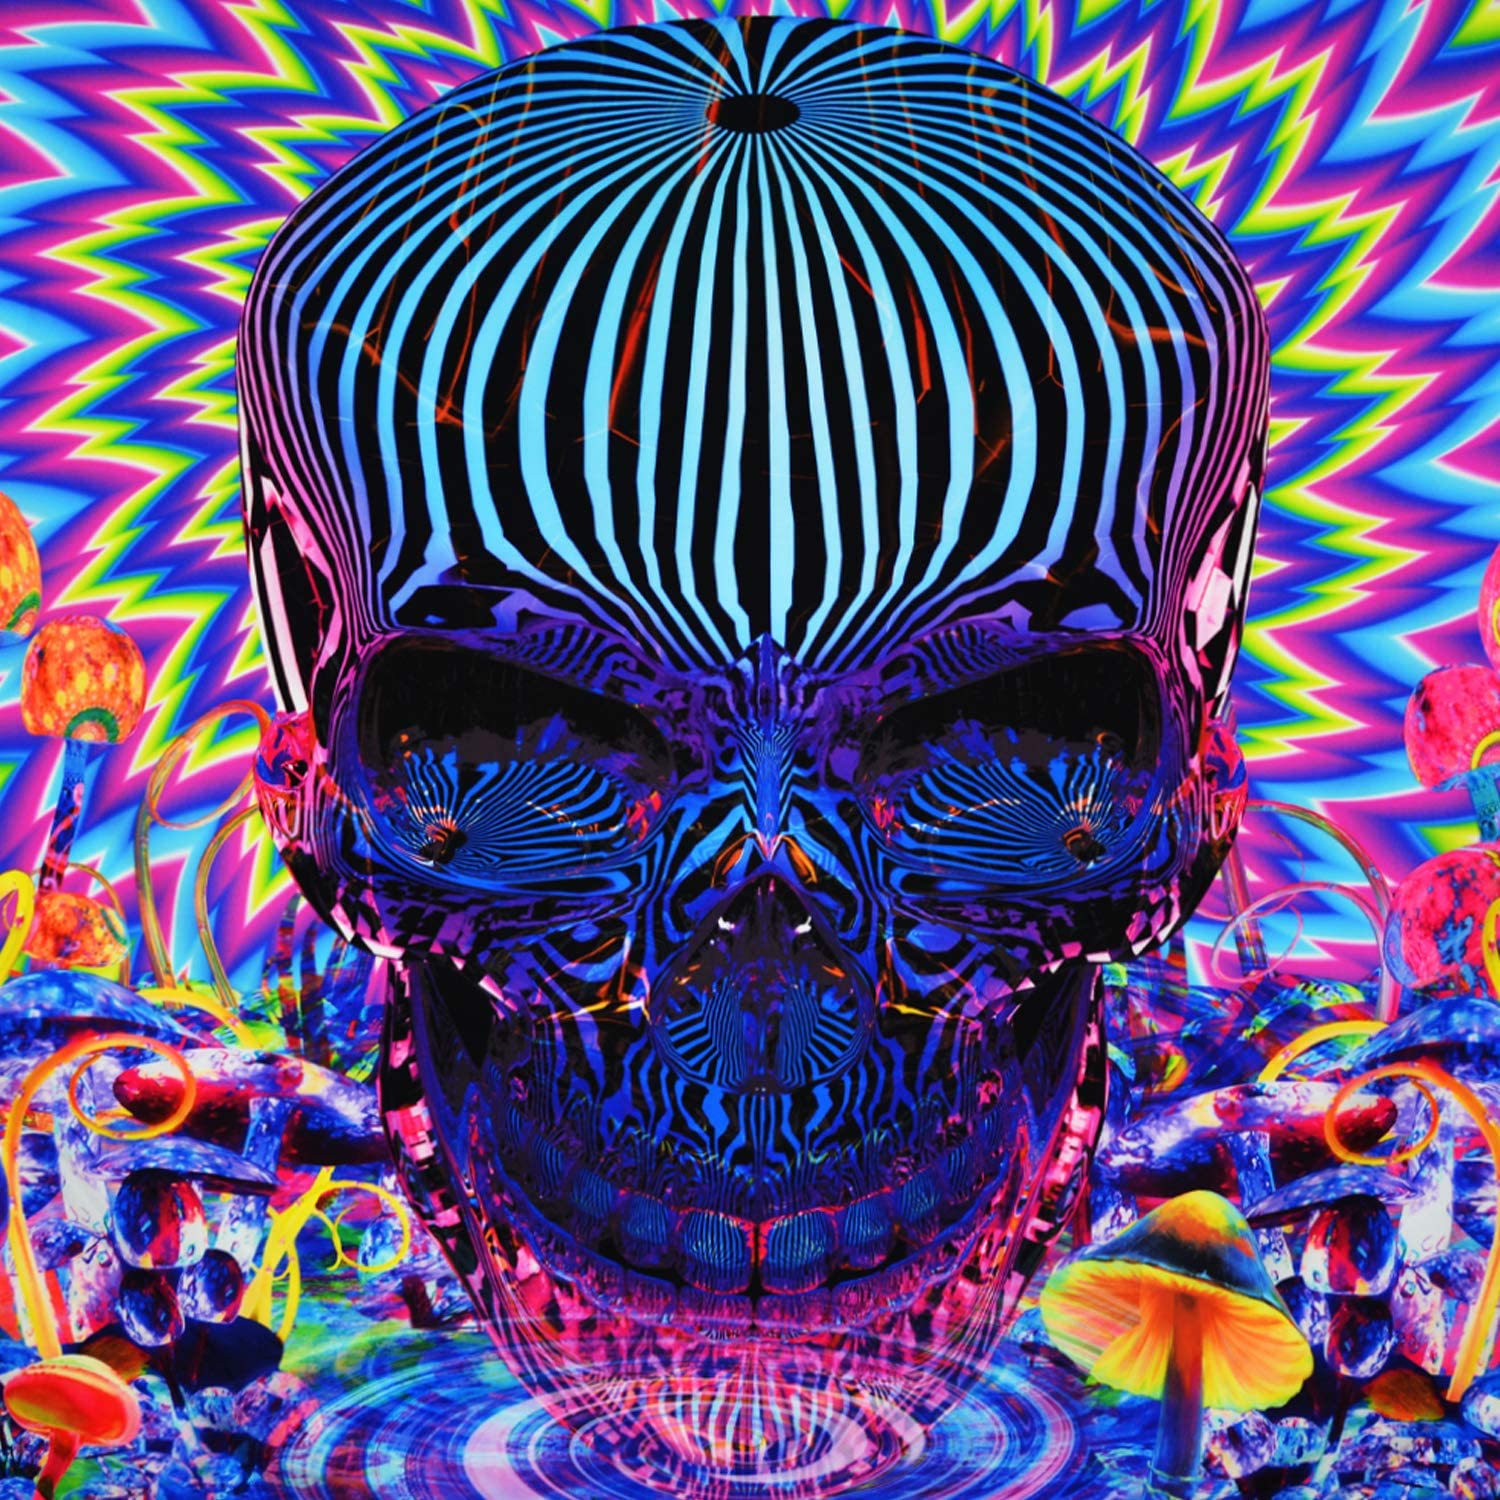 Galoker Psychedelic Tapestry Skull Tapestry Trippy Mushrooms Tapestry Colorful Abstract Tapestry Bohemian Hippie Tapestry Wall Hanging for Home Decor(H51.2×W59.1 inches), Home & Kitchen